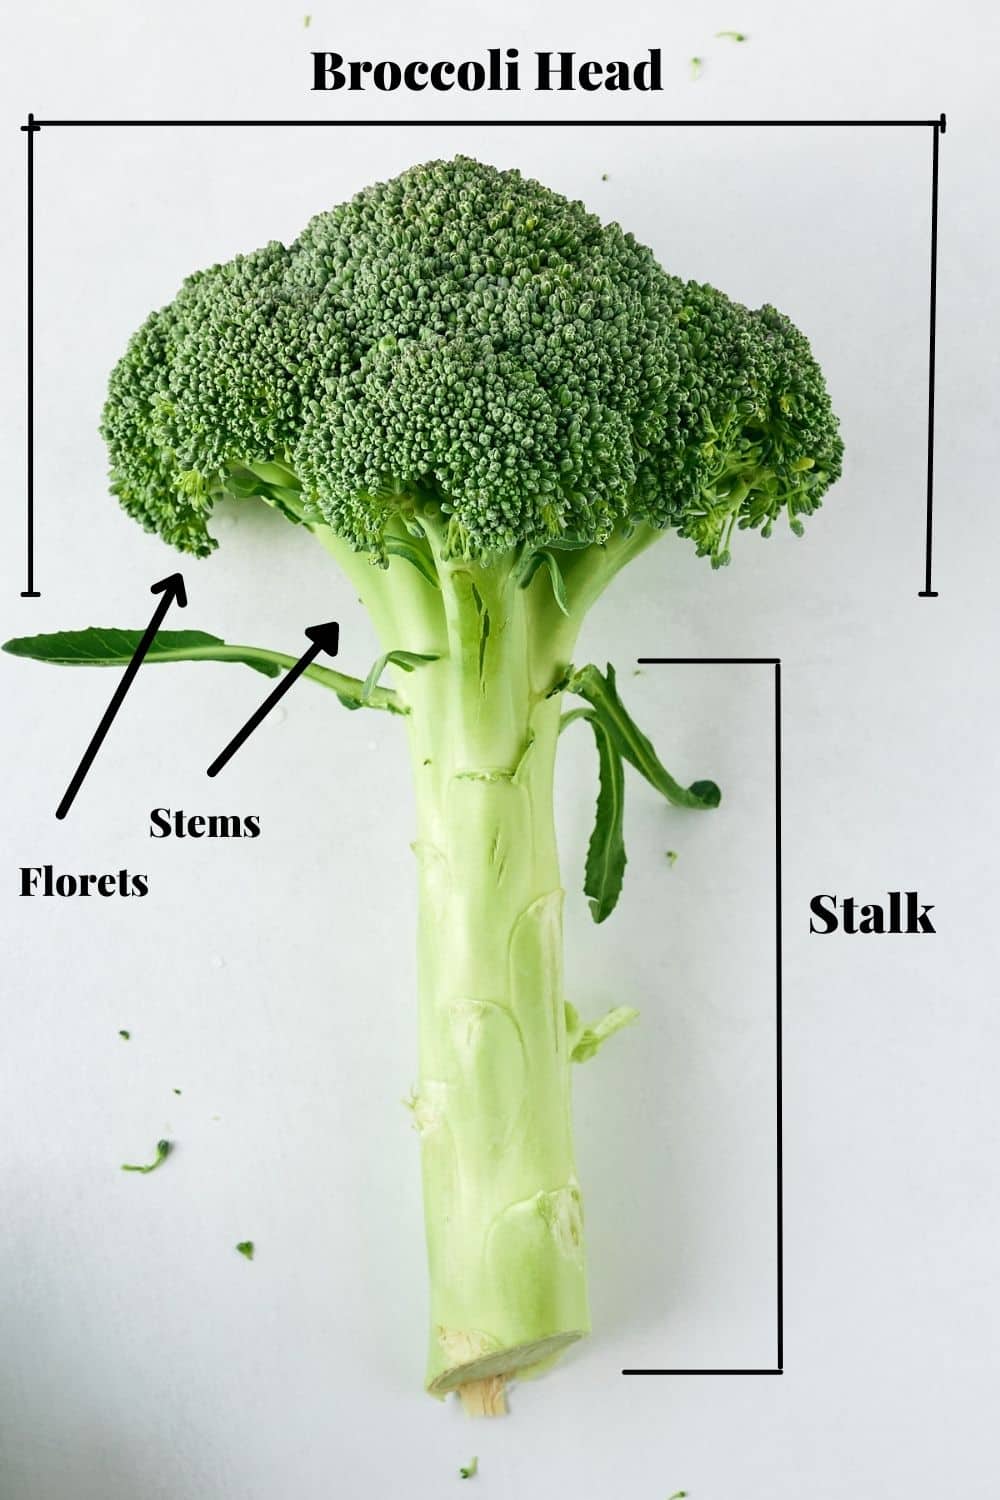 head of broccoli with labels of parts of broccoli